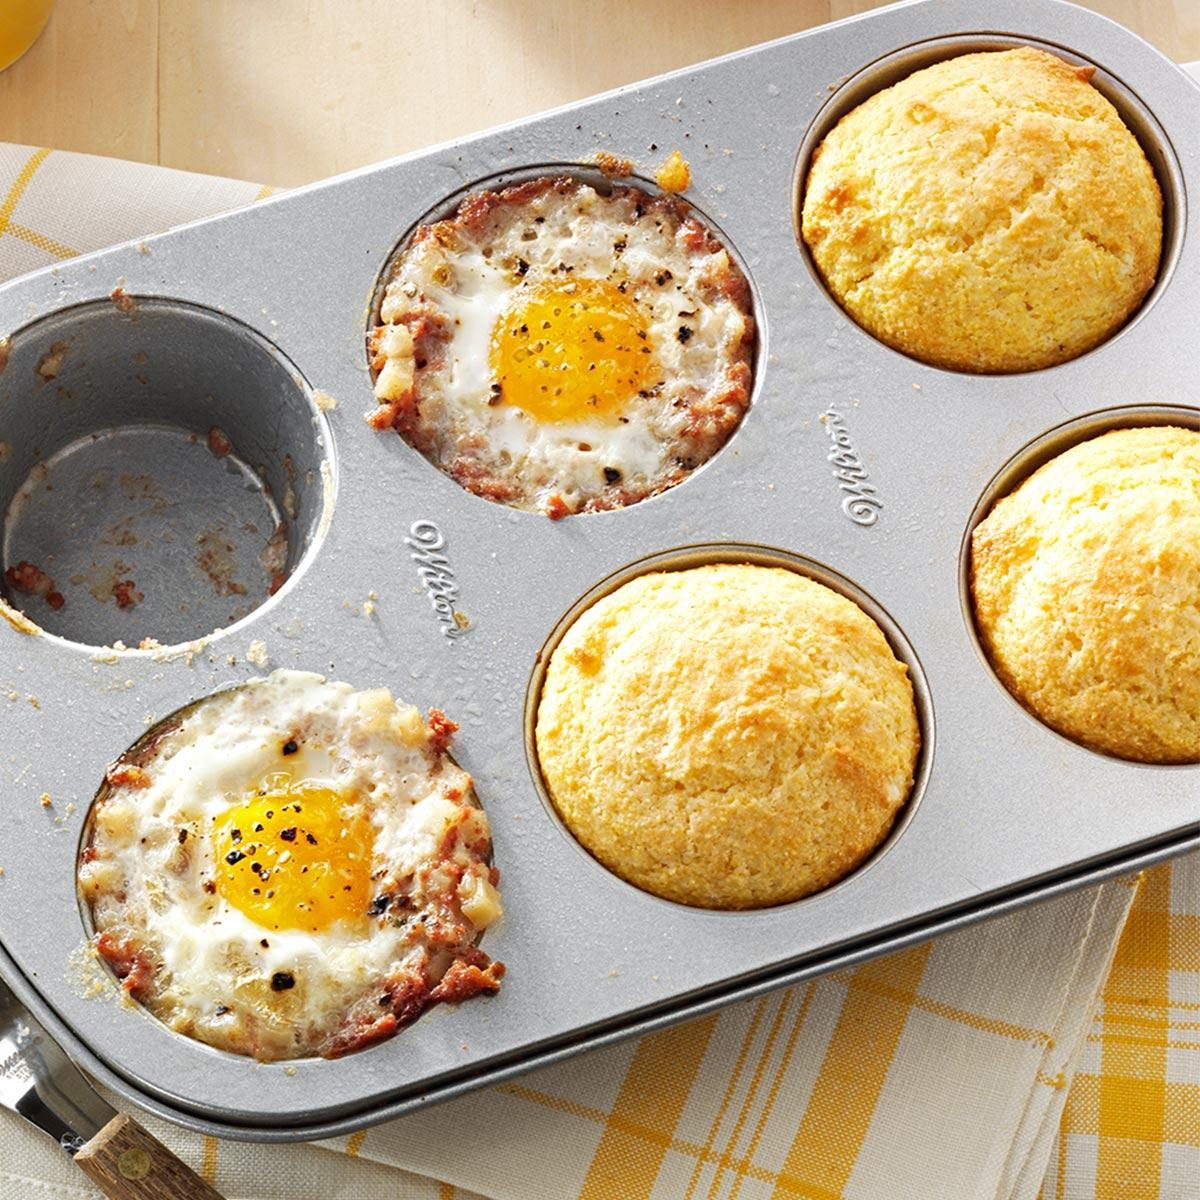 10+ Easy JUST Egg Recipes Ideas: Baking And Cooking - The VGN Way